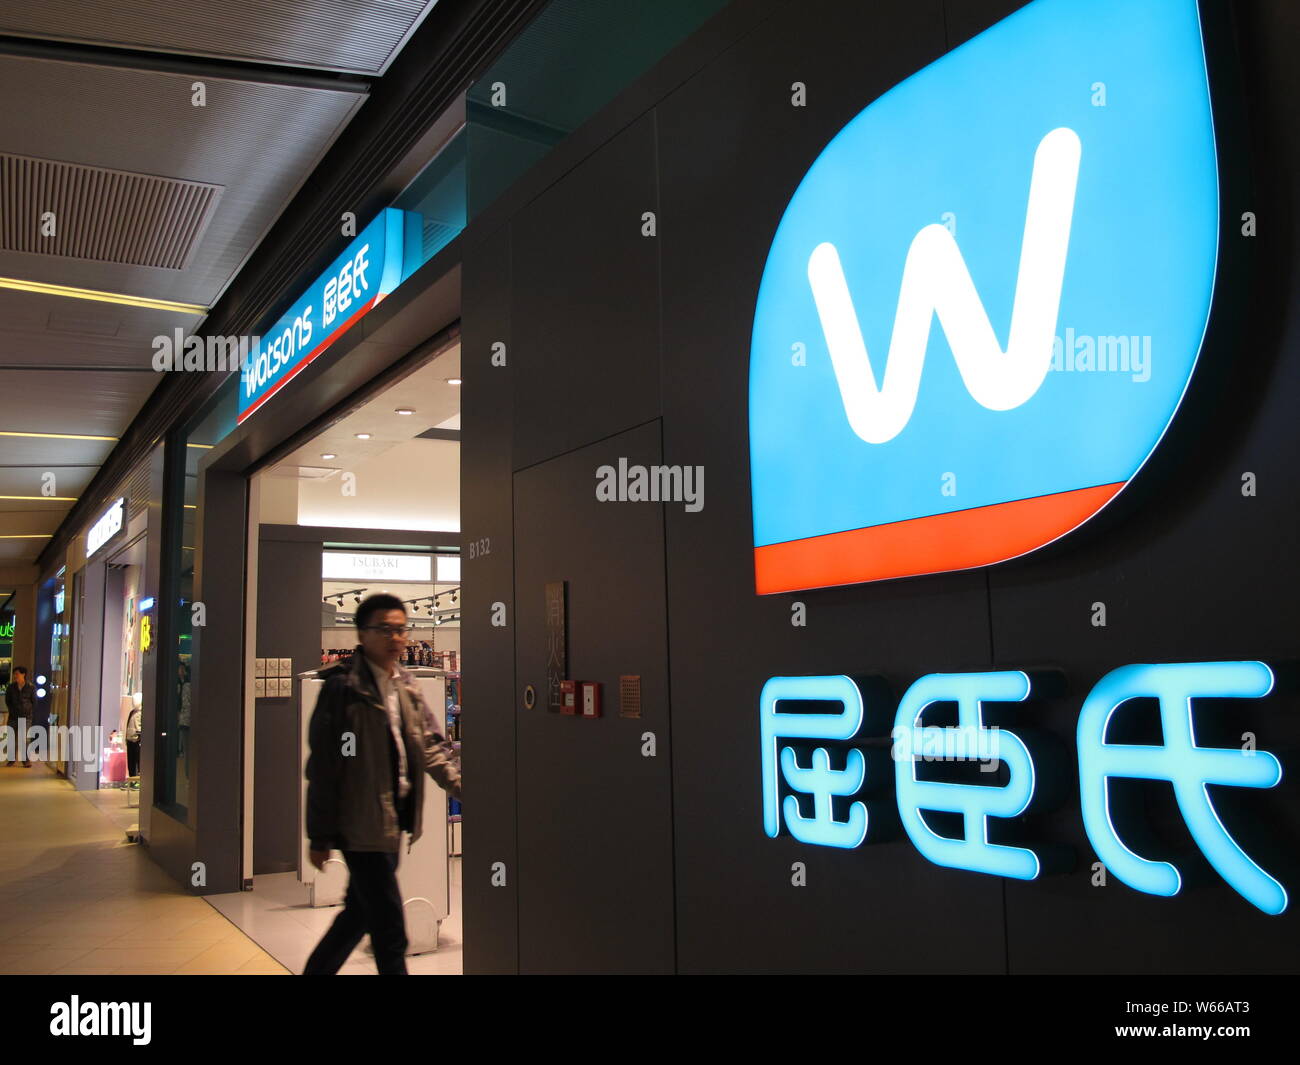 --FILE--A customer enters a Watsons store in Shanghai, China, 4 April 2018.   Asia's biggest health and beauty retail chain Watsons has launched a lar Stock Photo